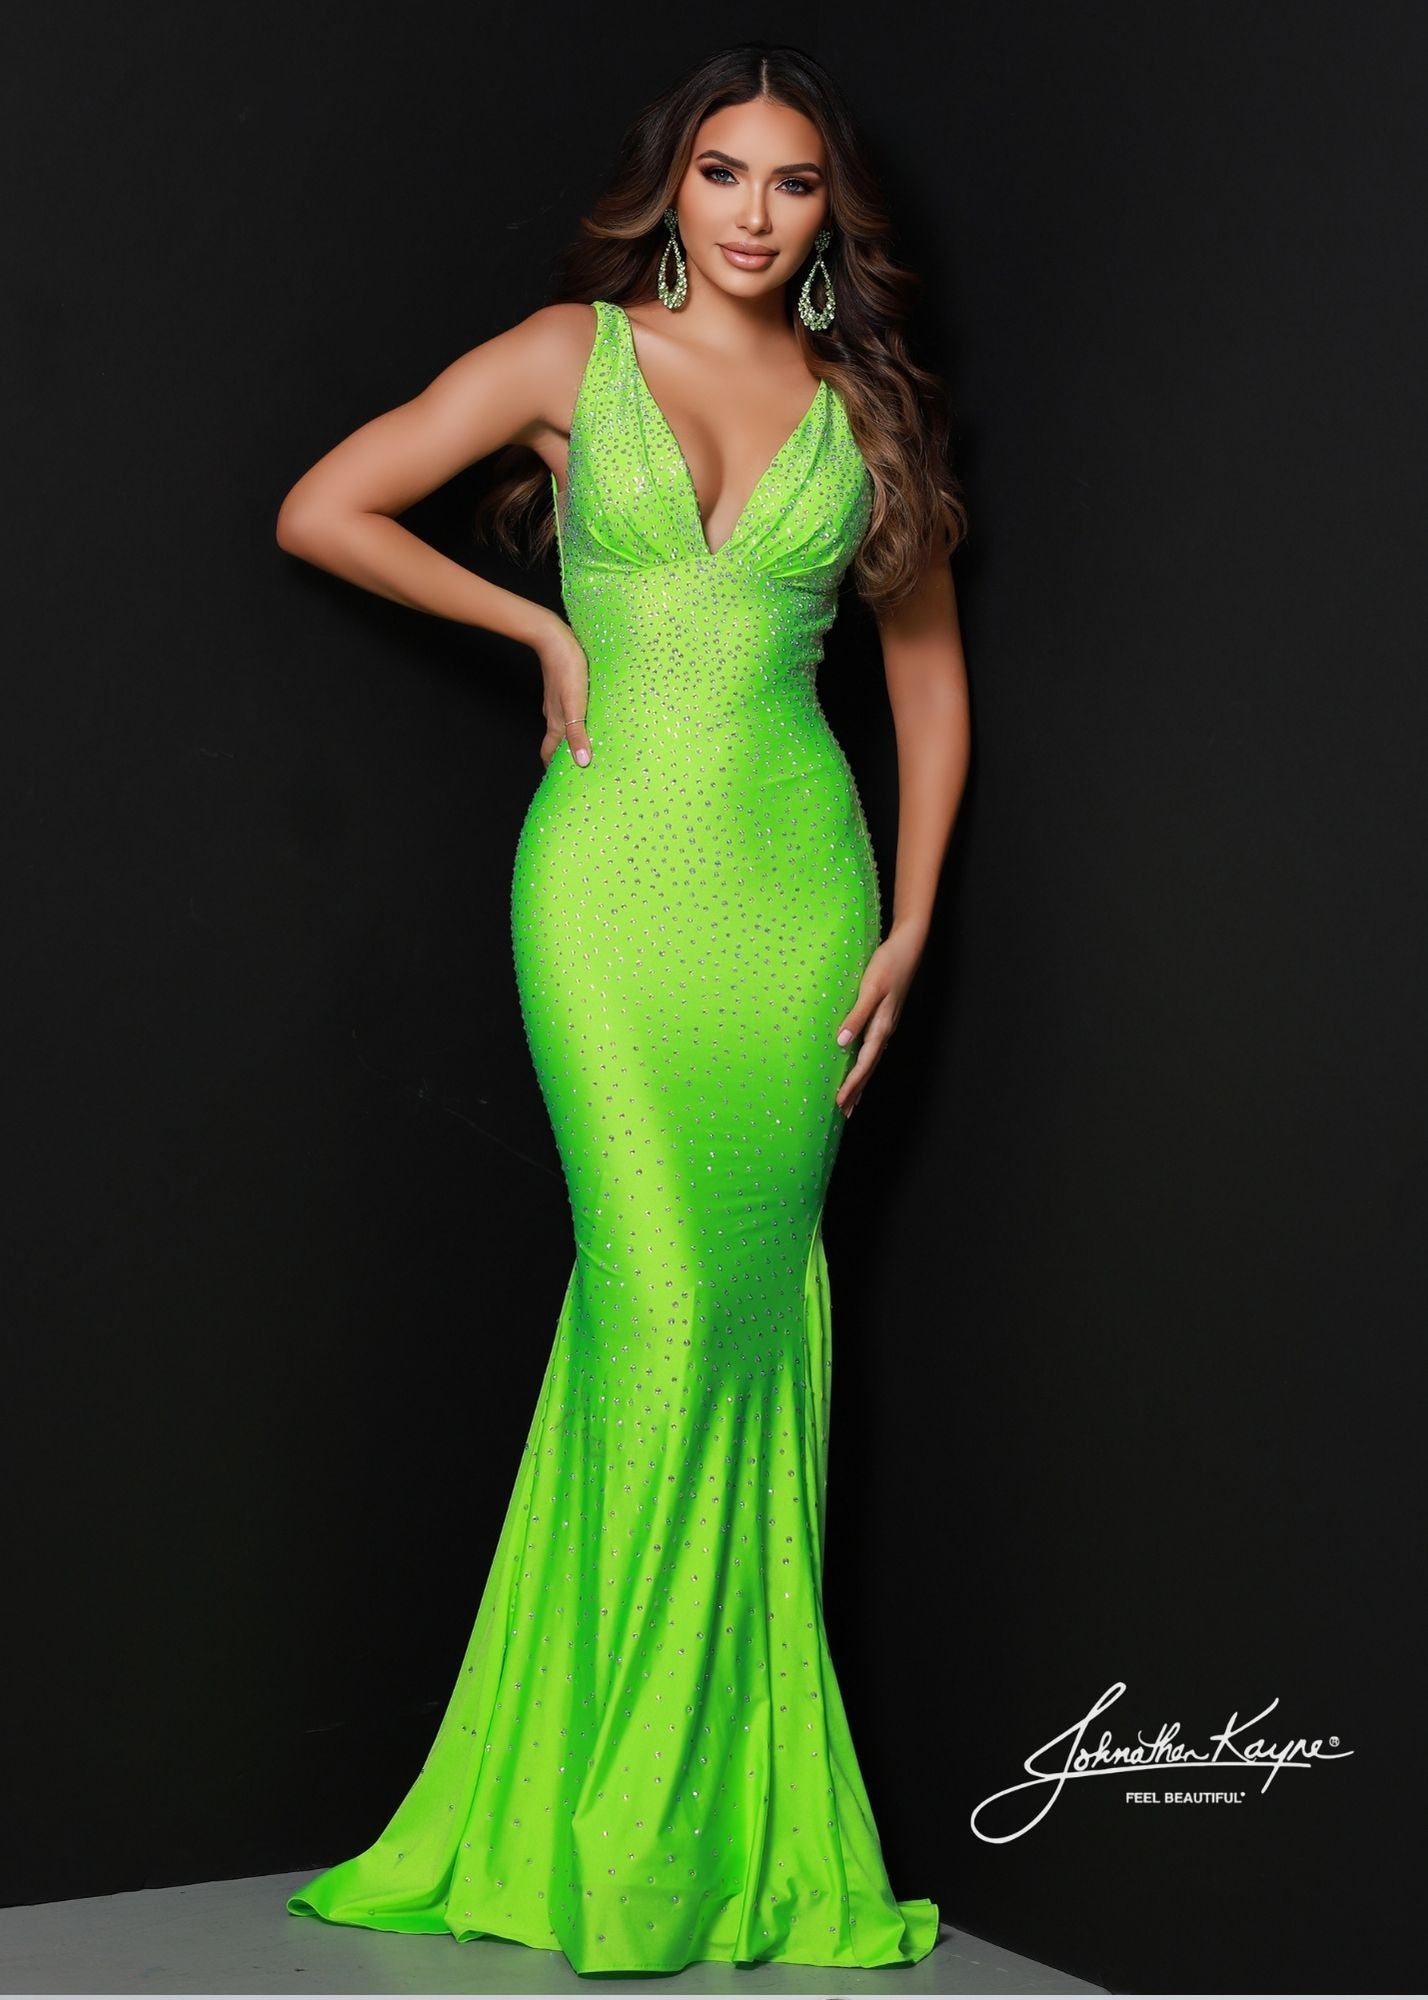 Johnathan Kayne 9213 is an embellished stretch Prom Dress, Pageant Gown & Formal Evening Wear. One of Johnathan Kayne's favorite styles for the Fall season, this elegant 4 way stretch lycra gown has a modern empire bodice and hugs the body all the way to the dramatic train. Adorn in shimmering crystals, this gem of a gown will turn heads.